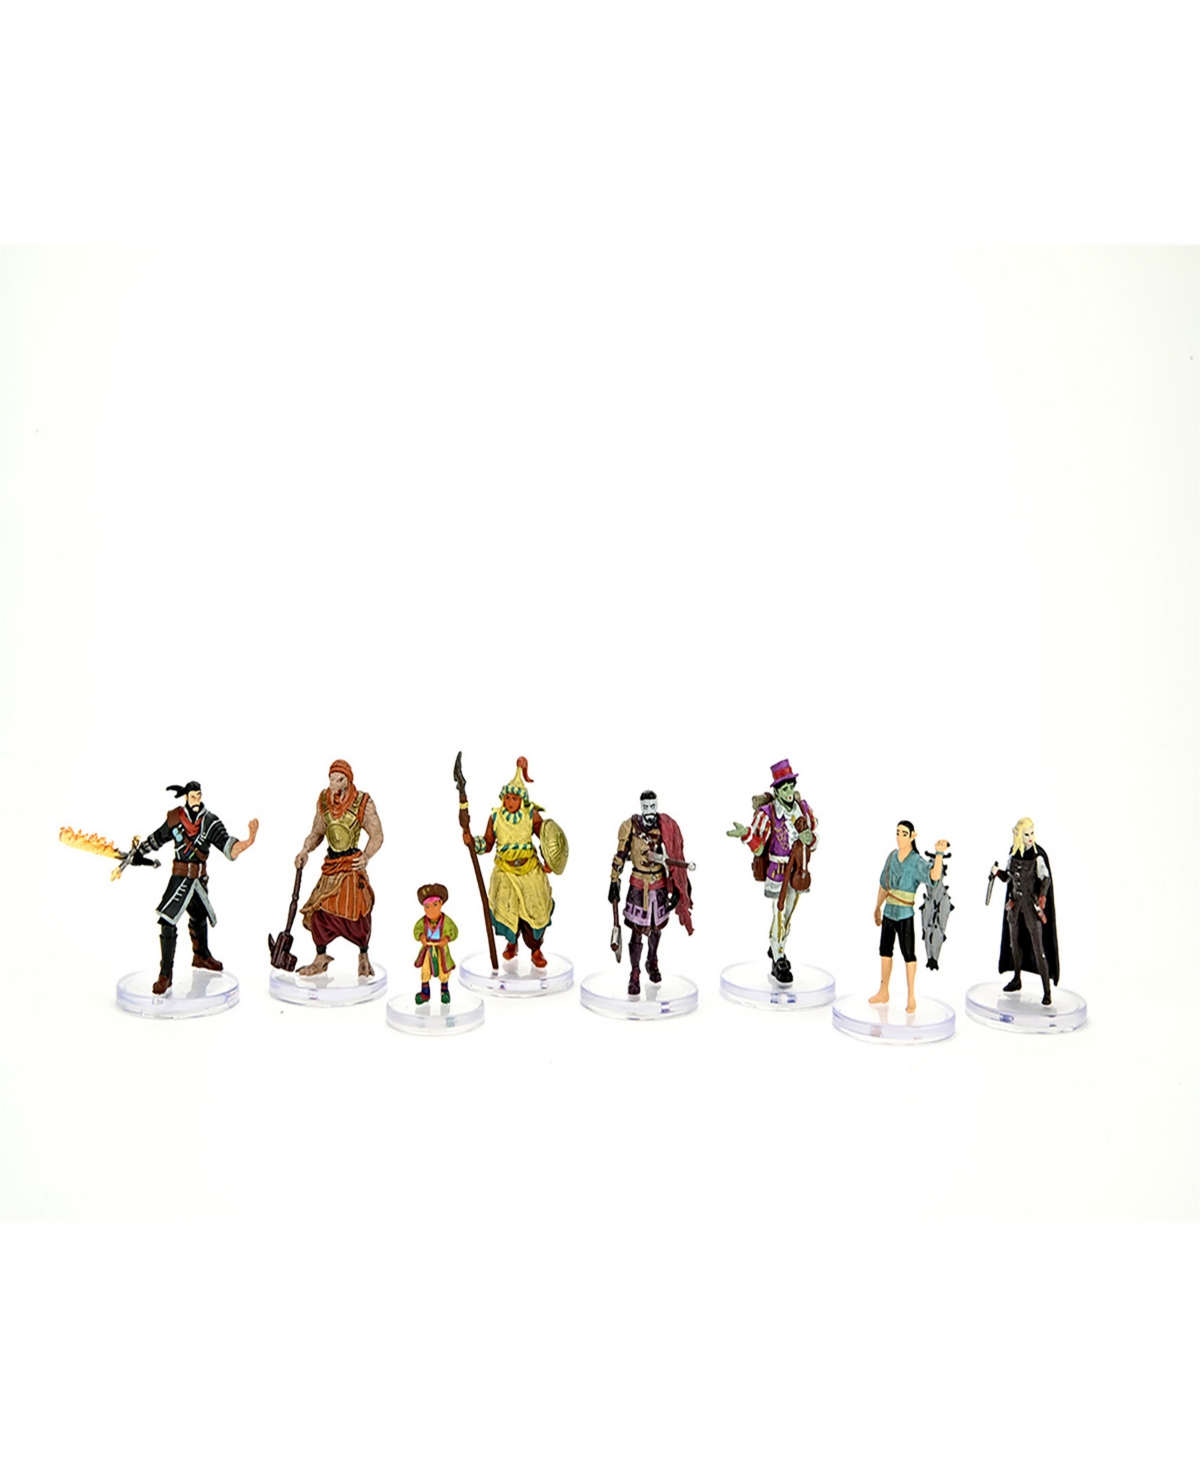 Shop Wizkids Games Critical Role Factions Of Wild Mount Pre Painted Role Playing Game Clovis Concord Menagerie Coast Bo In Multi